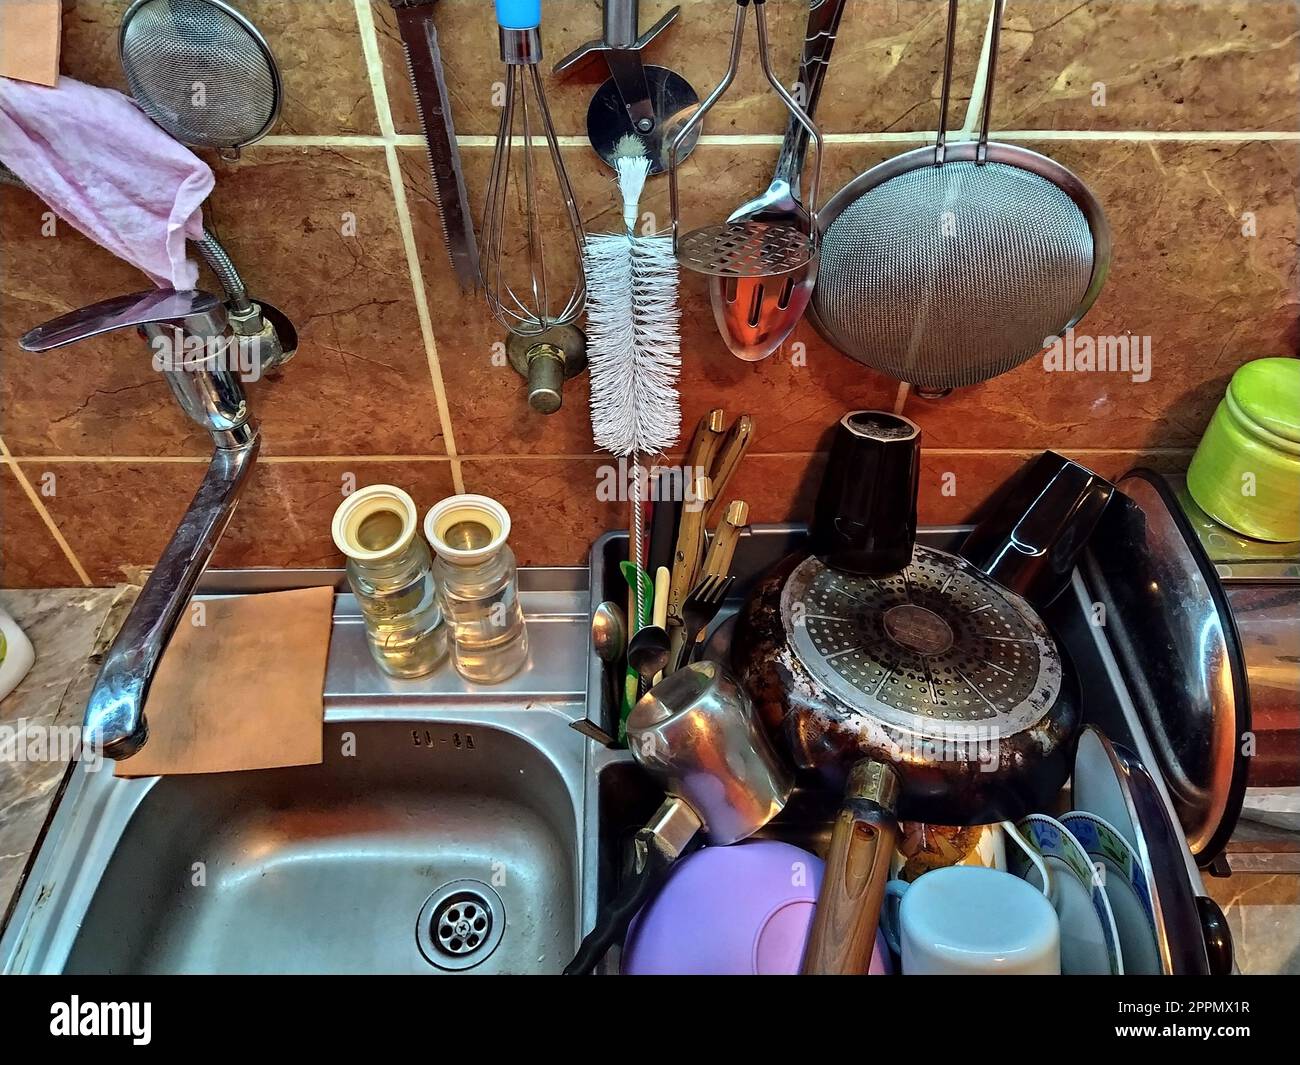 Belgrade, Serbia, December 12, 2020. Kitchen, countertop with sink, top view. Home daily life. The washed dishes are stacked near the sink. Kitchenware is hung on the tile wall. Colander, sponges rags Stock Photo